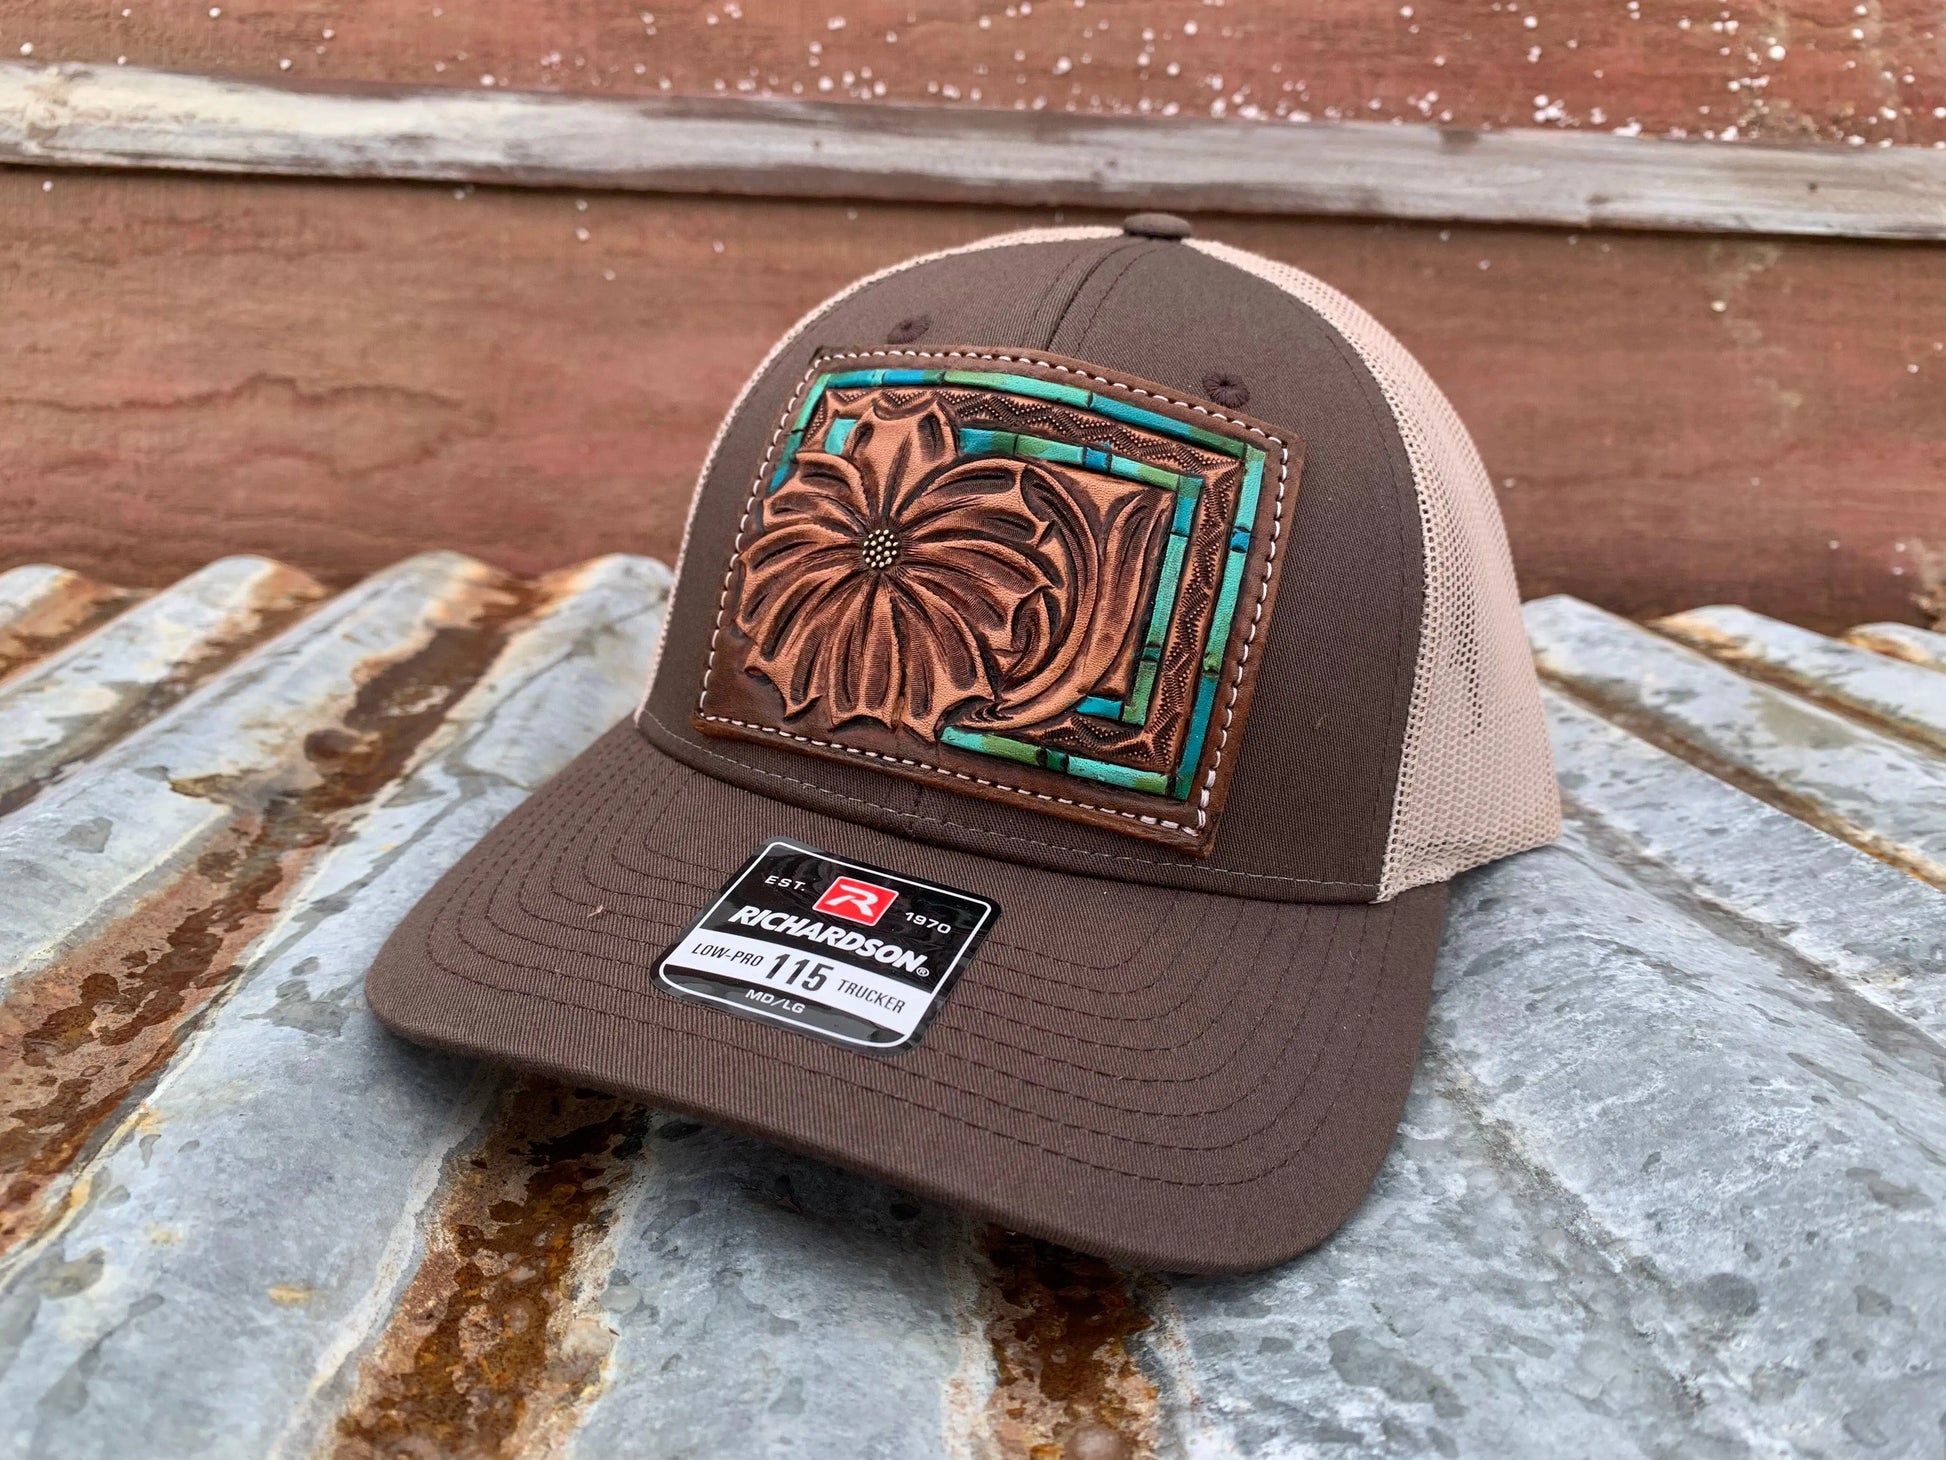 Handtooled leather patch cap The Daisy Handtooled Leather Patch Cap with Turquoise Southwestern Border The Rodeo Rose Handtooled leather patch cap cowgirl hat cowboy hat 